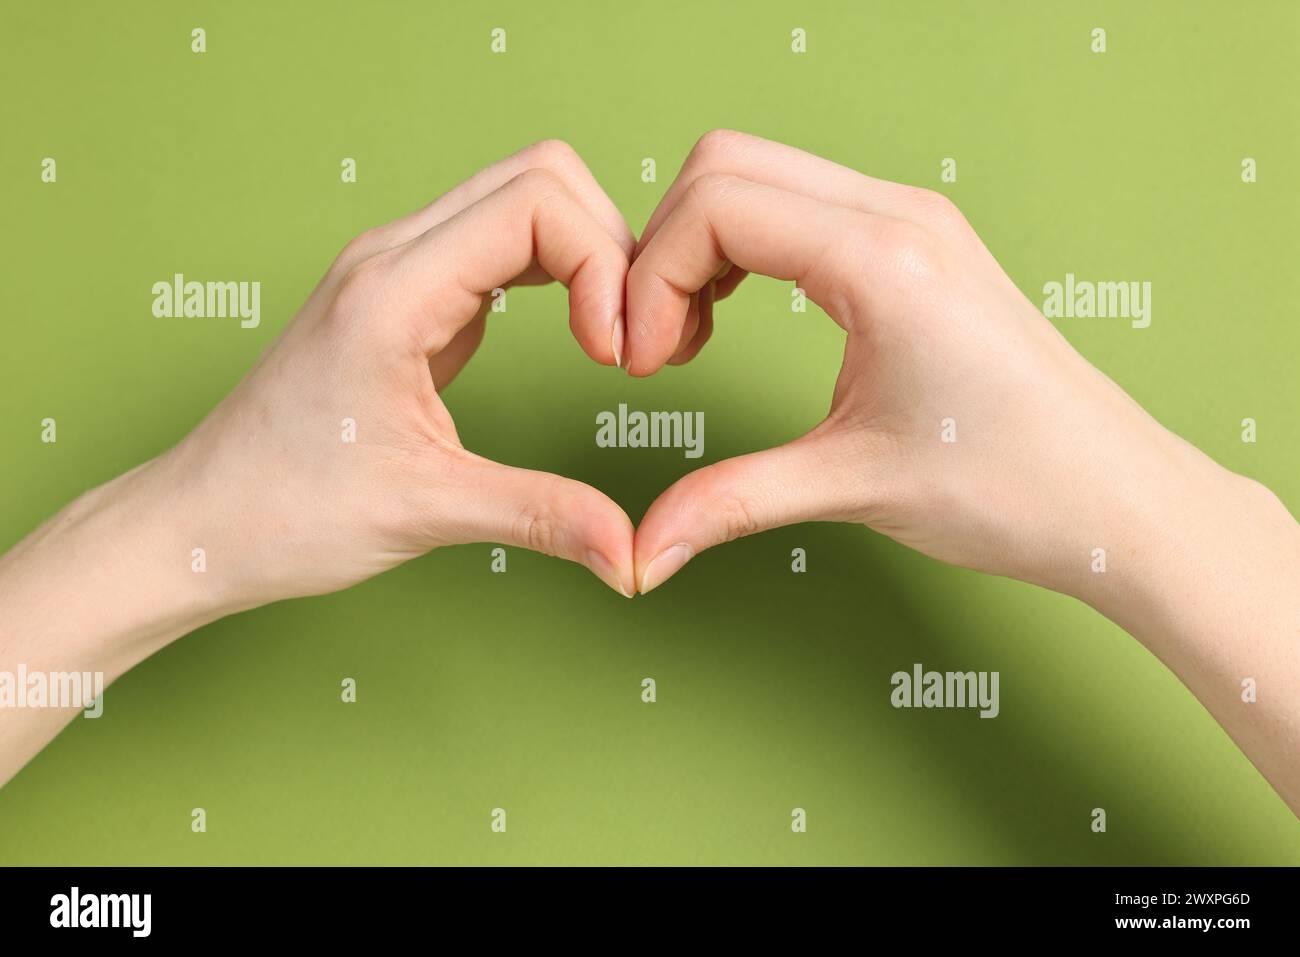 Woman showing heart gesture with hands on green background, closeup Stock Photo